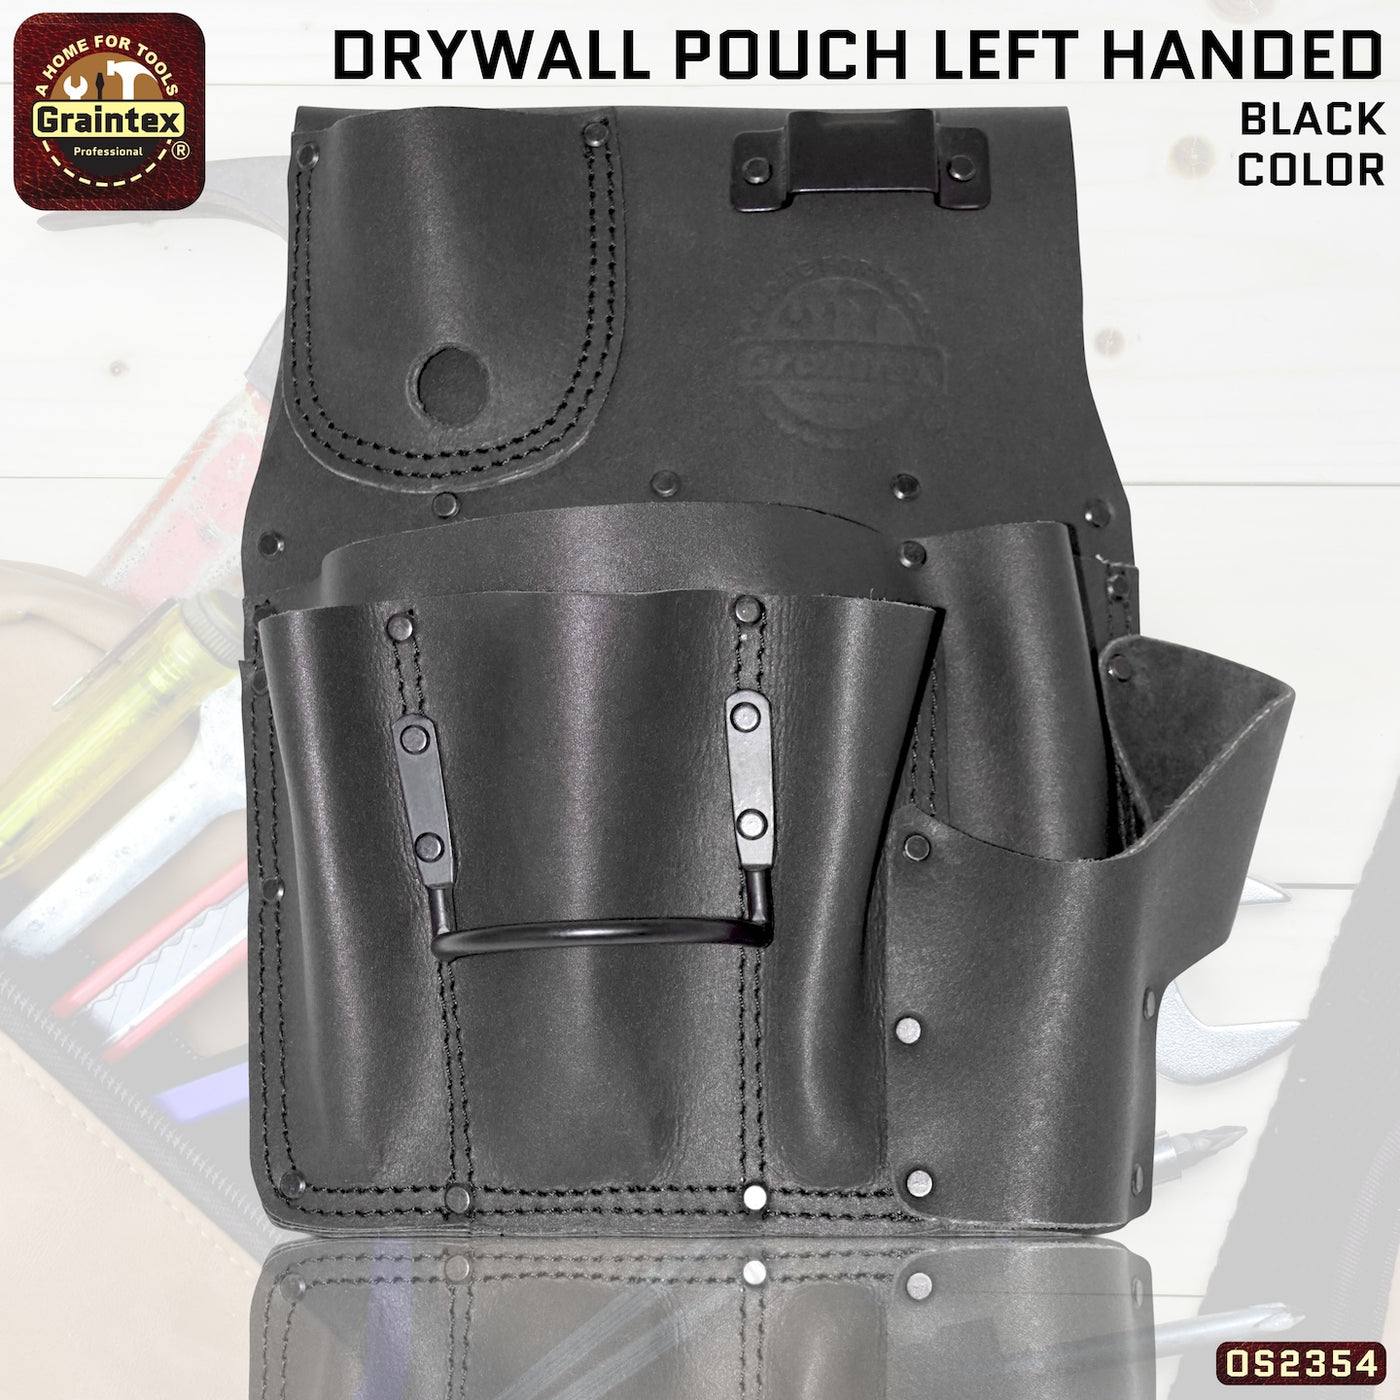 OS2354 :: Drywall Pouch Left Handed Black Color Top Grain Leather